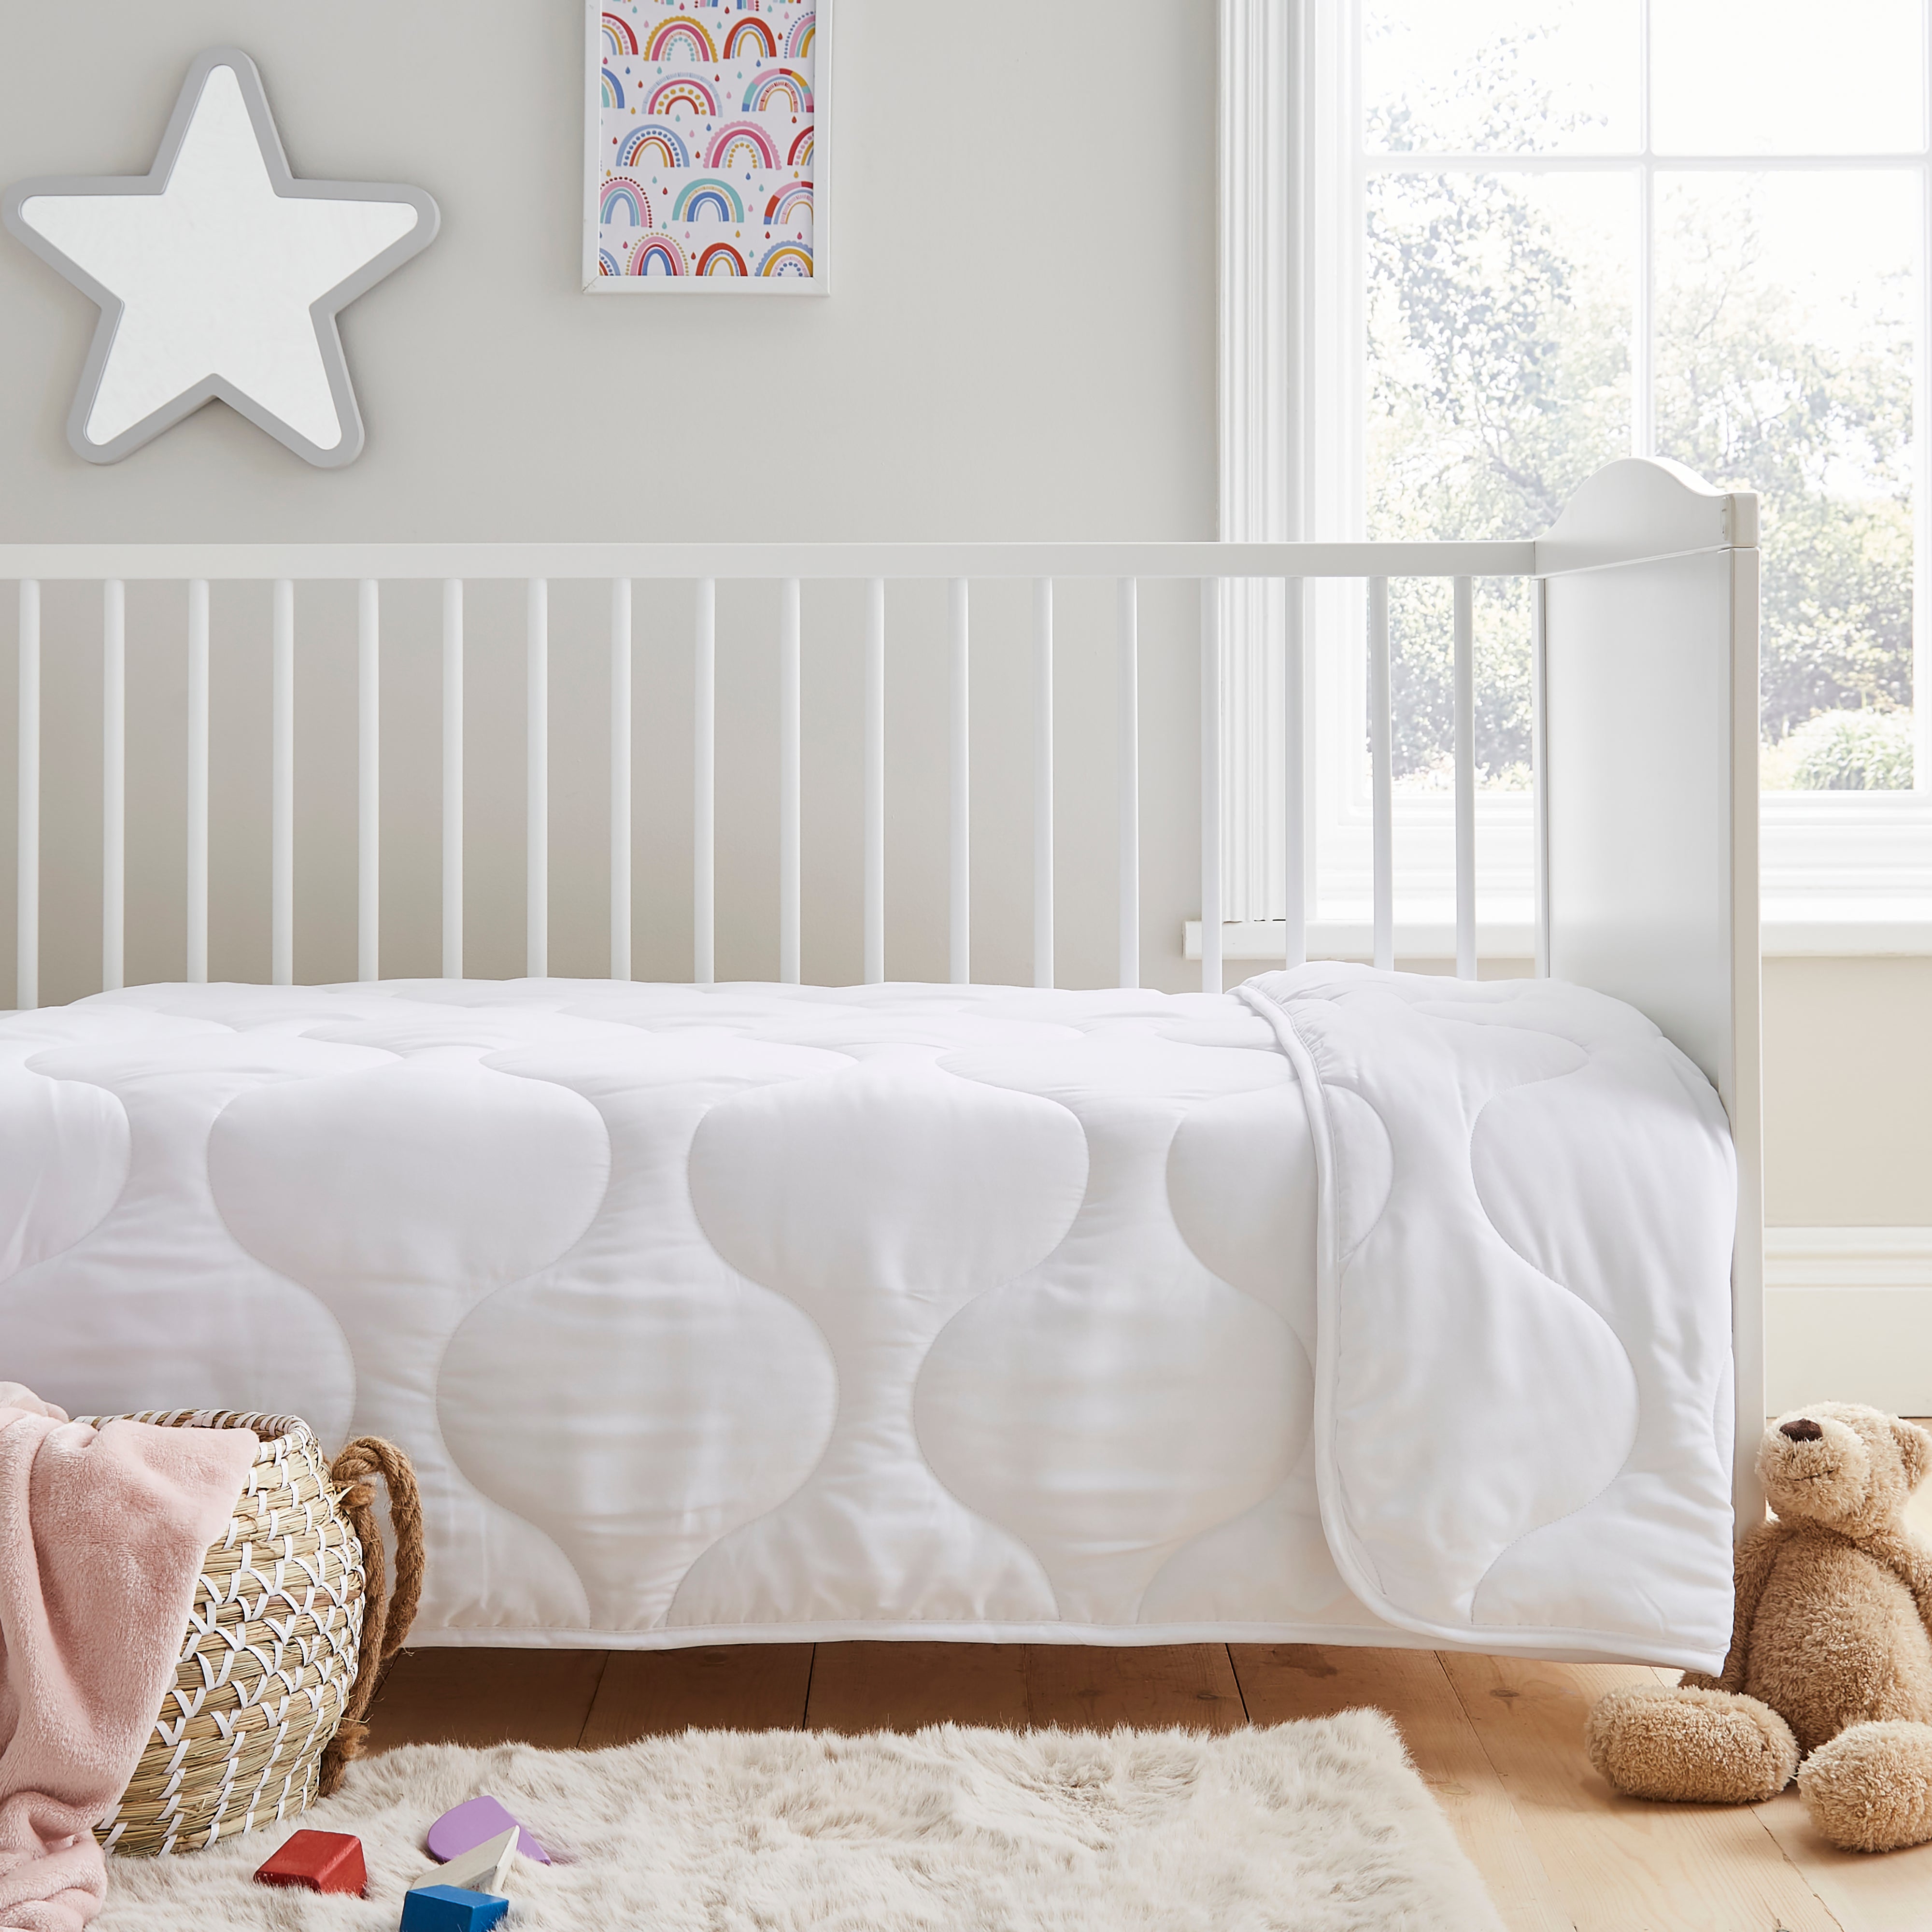 Fogarty Little Sleepers Perfectly Washable 4 Tog Summer Cot Bed Duvet